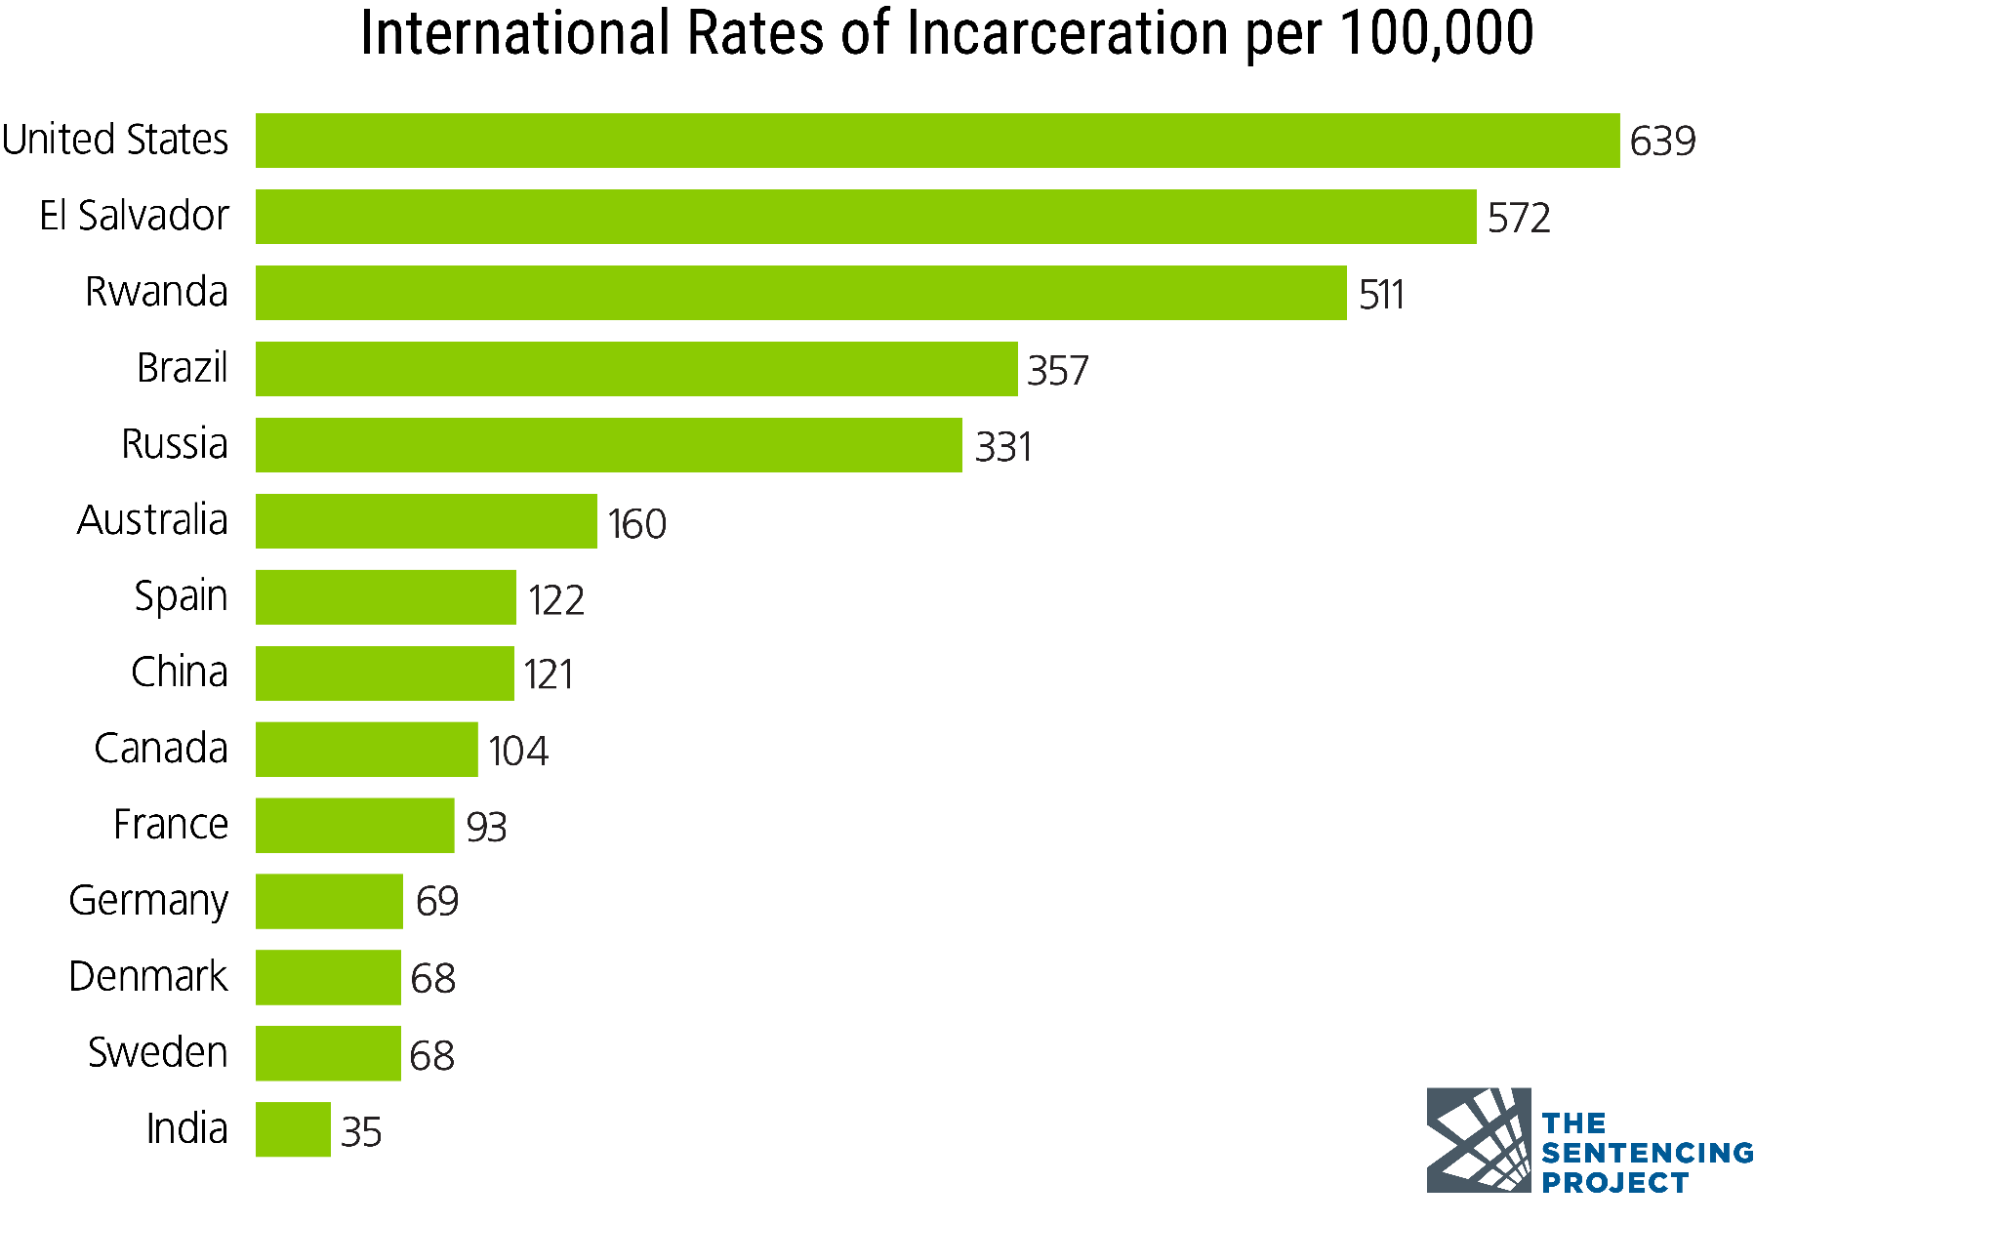 A bar graph showing international incarceration rates per 100,000. The United States is noted as having the highest rate of 639 per 100,000 in comparison to 13 other countries.